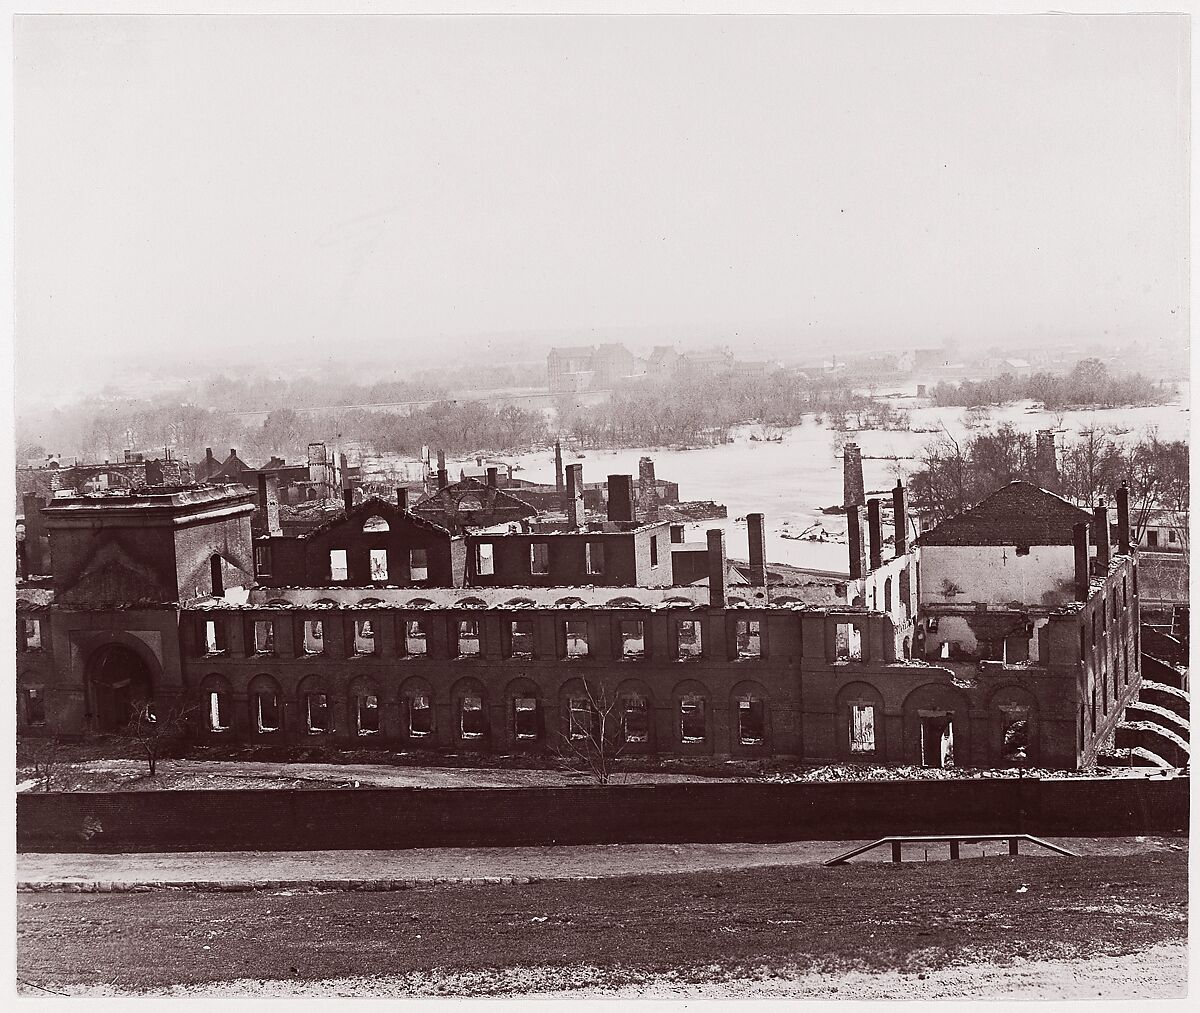 [Ruins of the Arsenal, Richmond, Virginia, after Evacuations], Attributed to Alexander Gardner (American, Glasgow, Scotland 1821–1882 Washington, D.C.), Albumen silver print from glass negative 